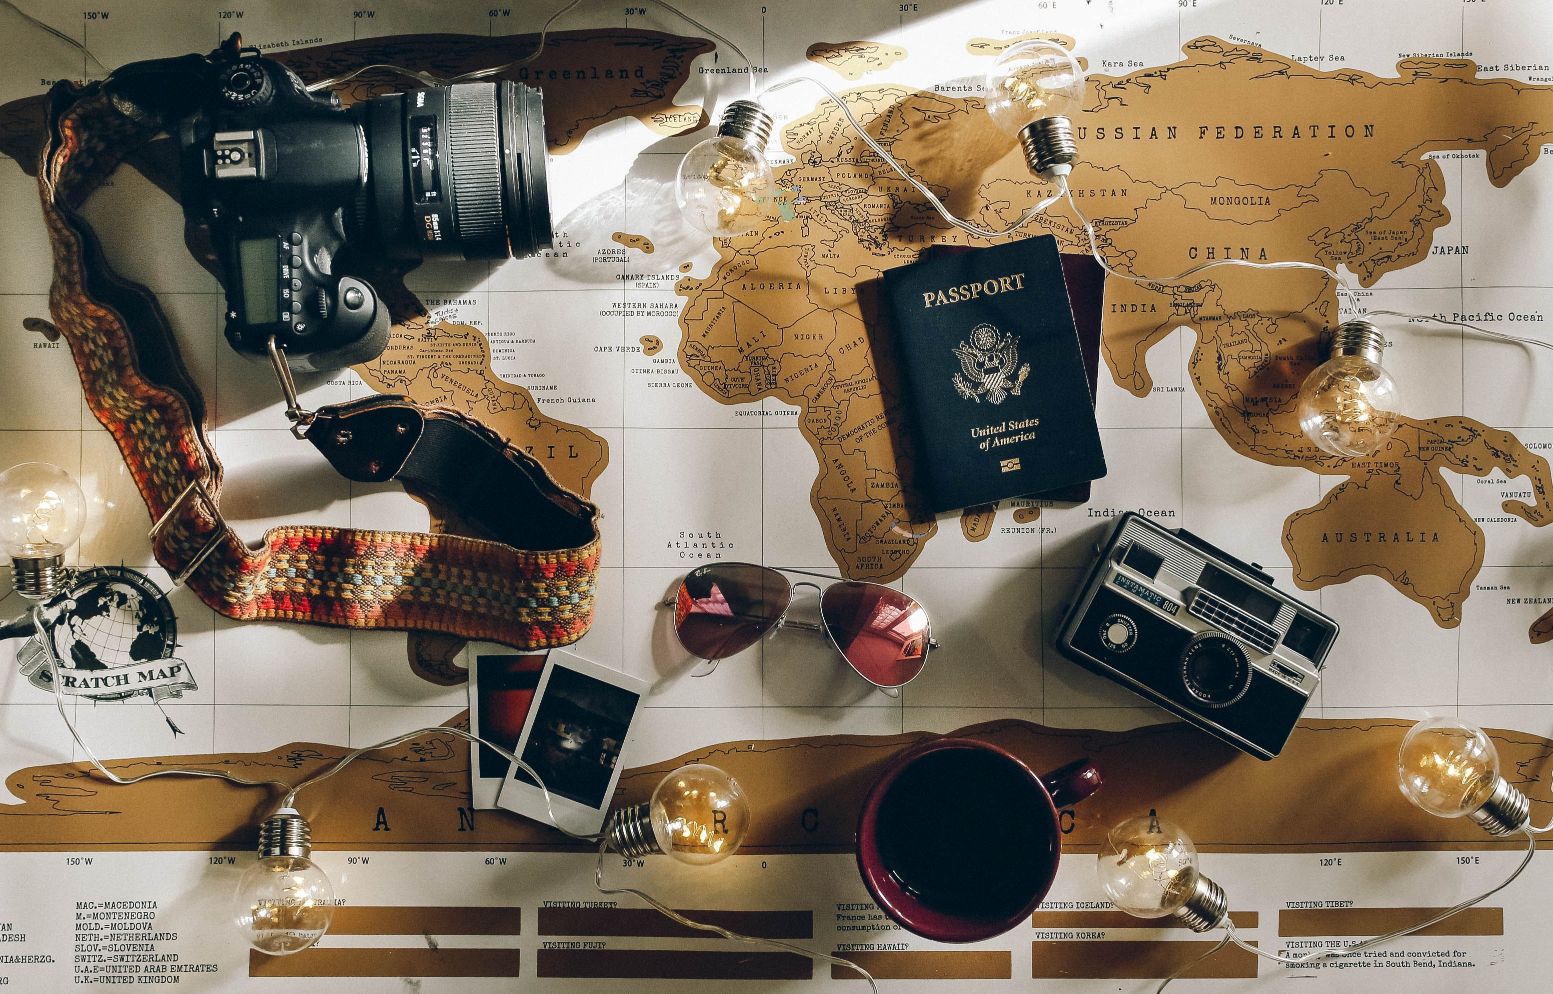 A scratch map in the background; a camera, passport and other travel accessories are on top of it.